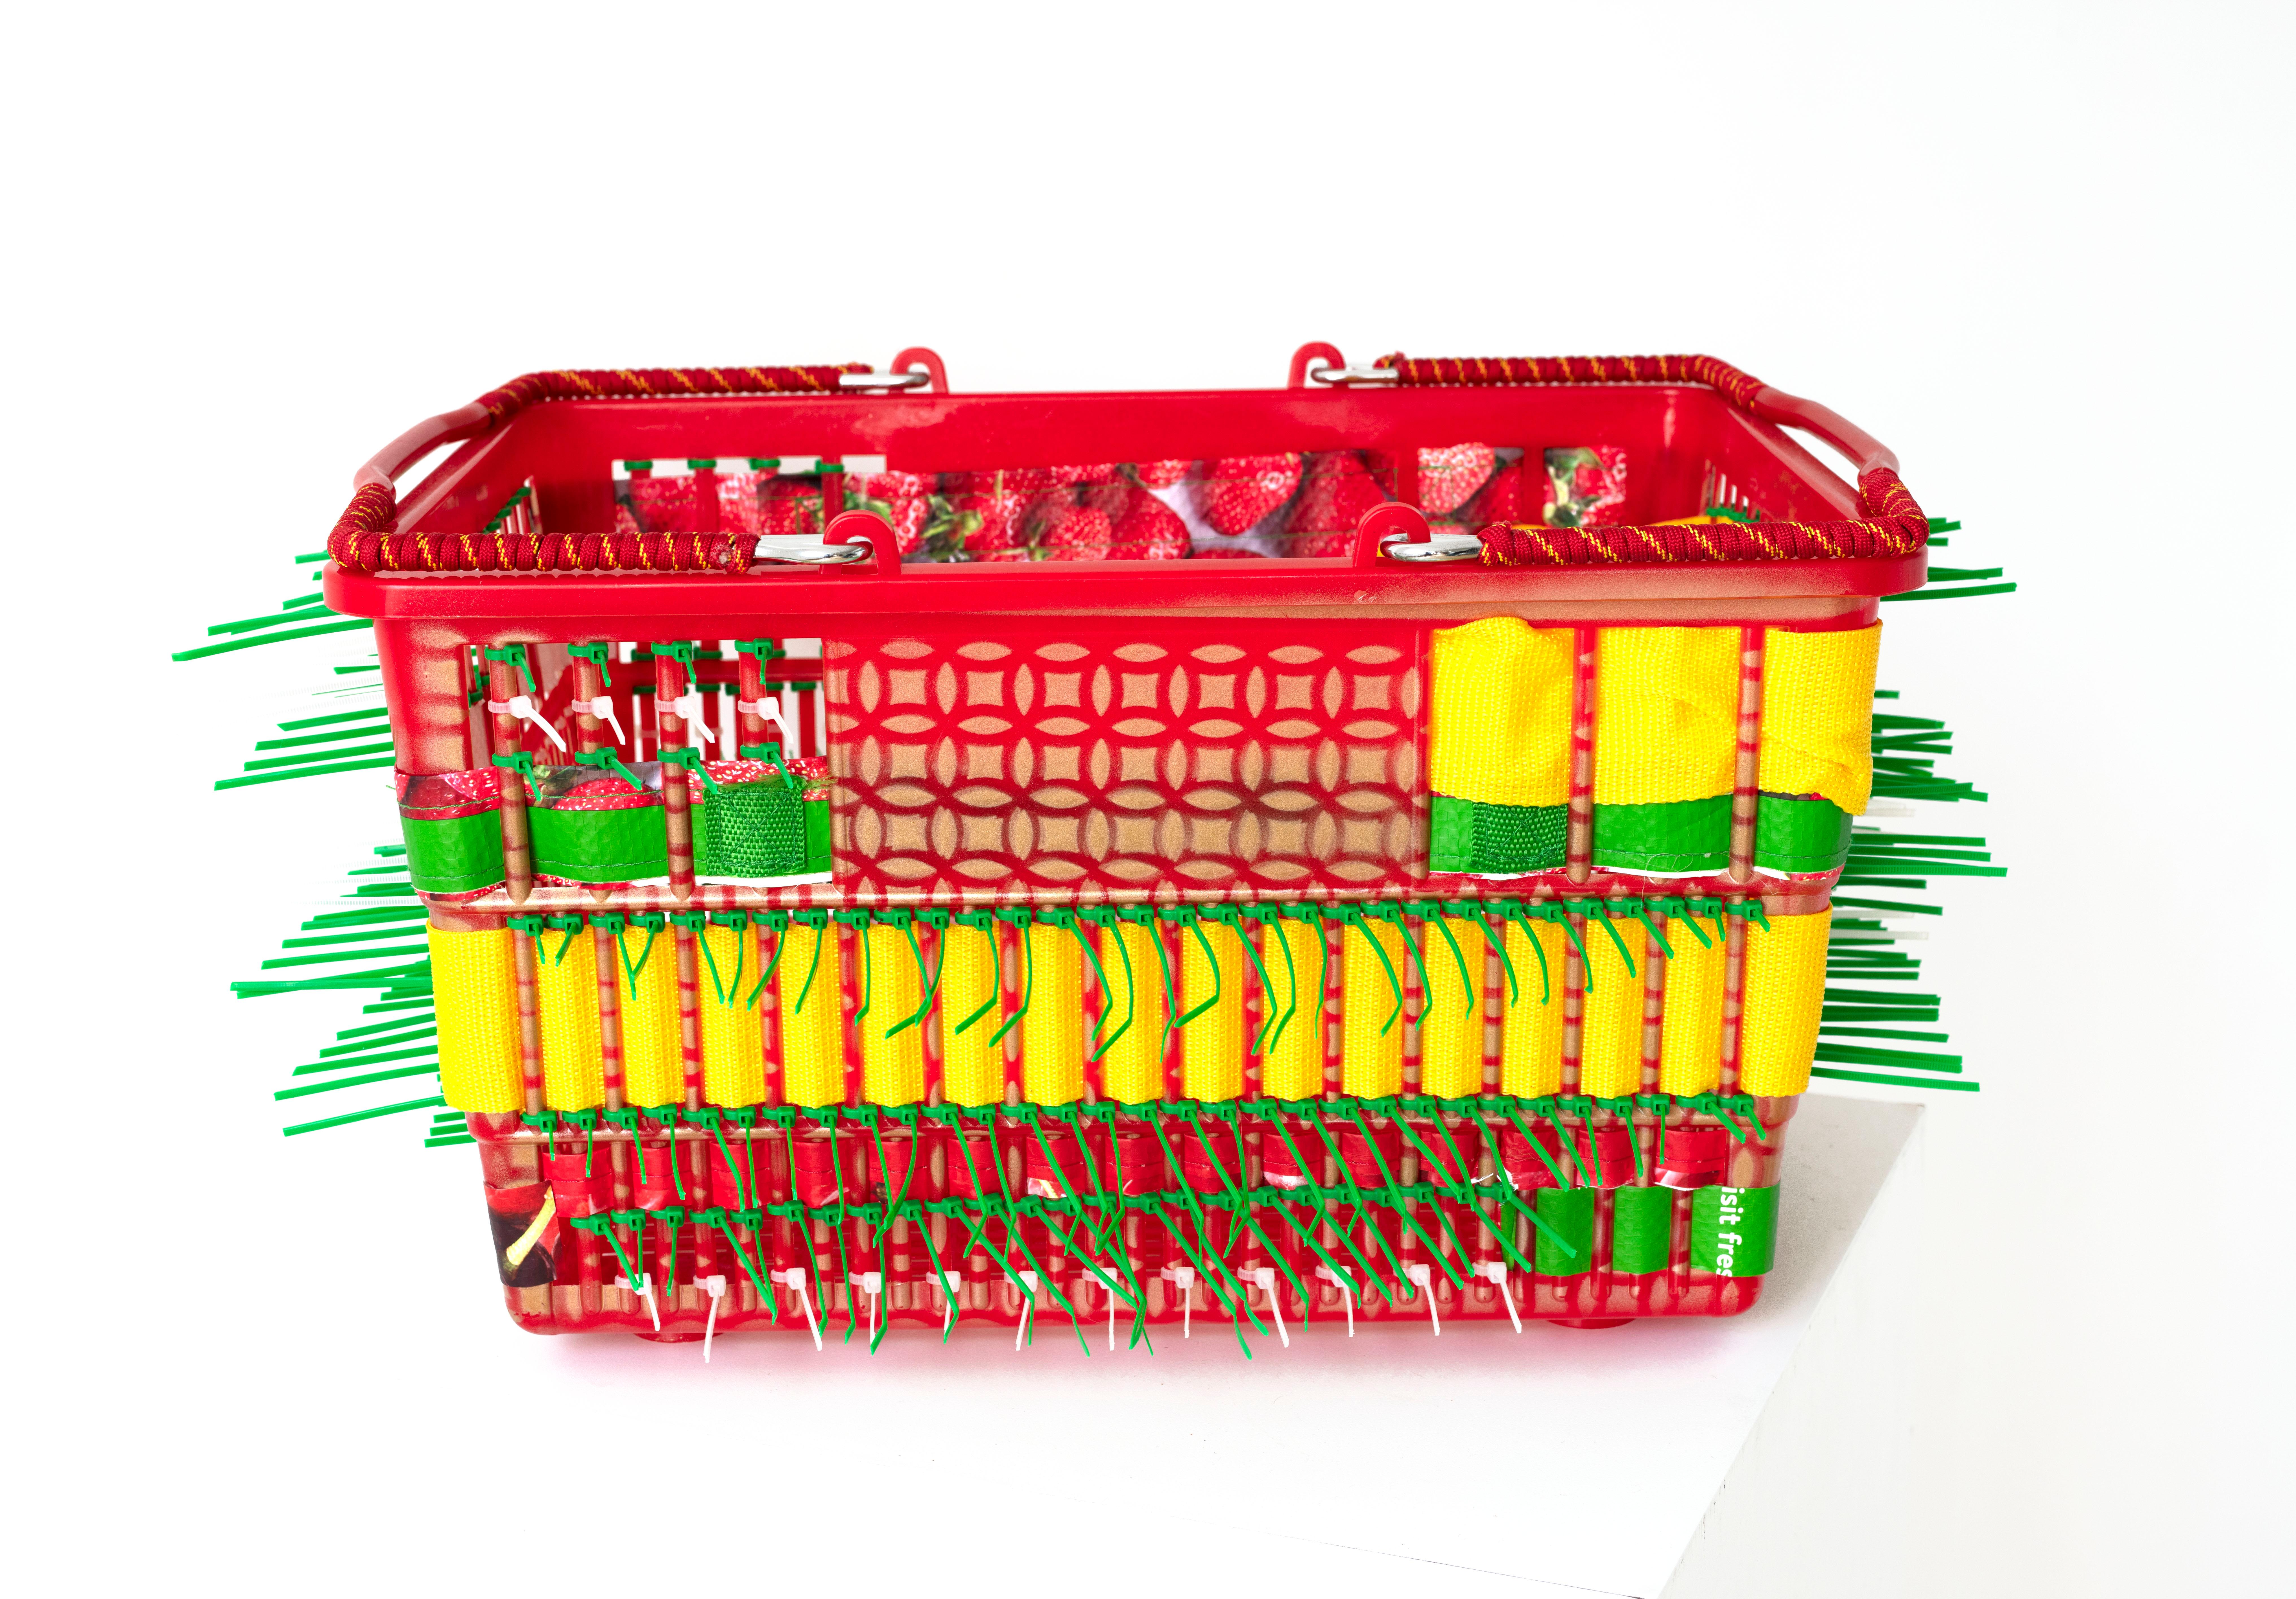 Upcycled Grocery Basket Sculpture: 'Convenience Basket 1/6' For Sale 1